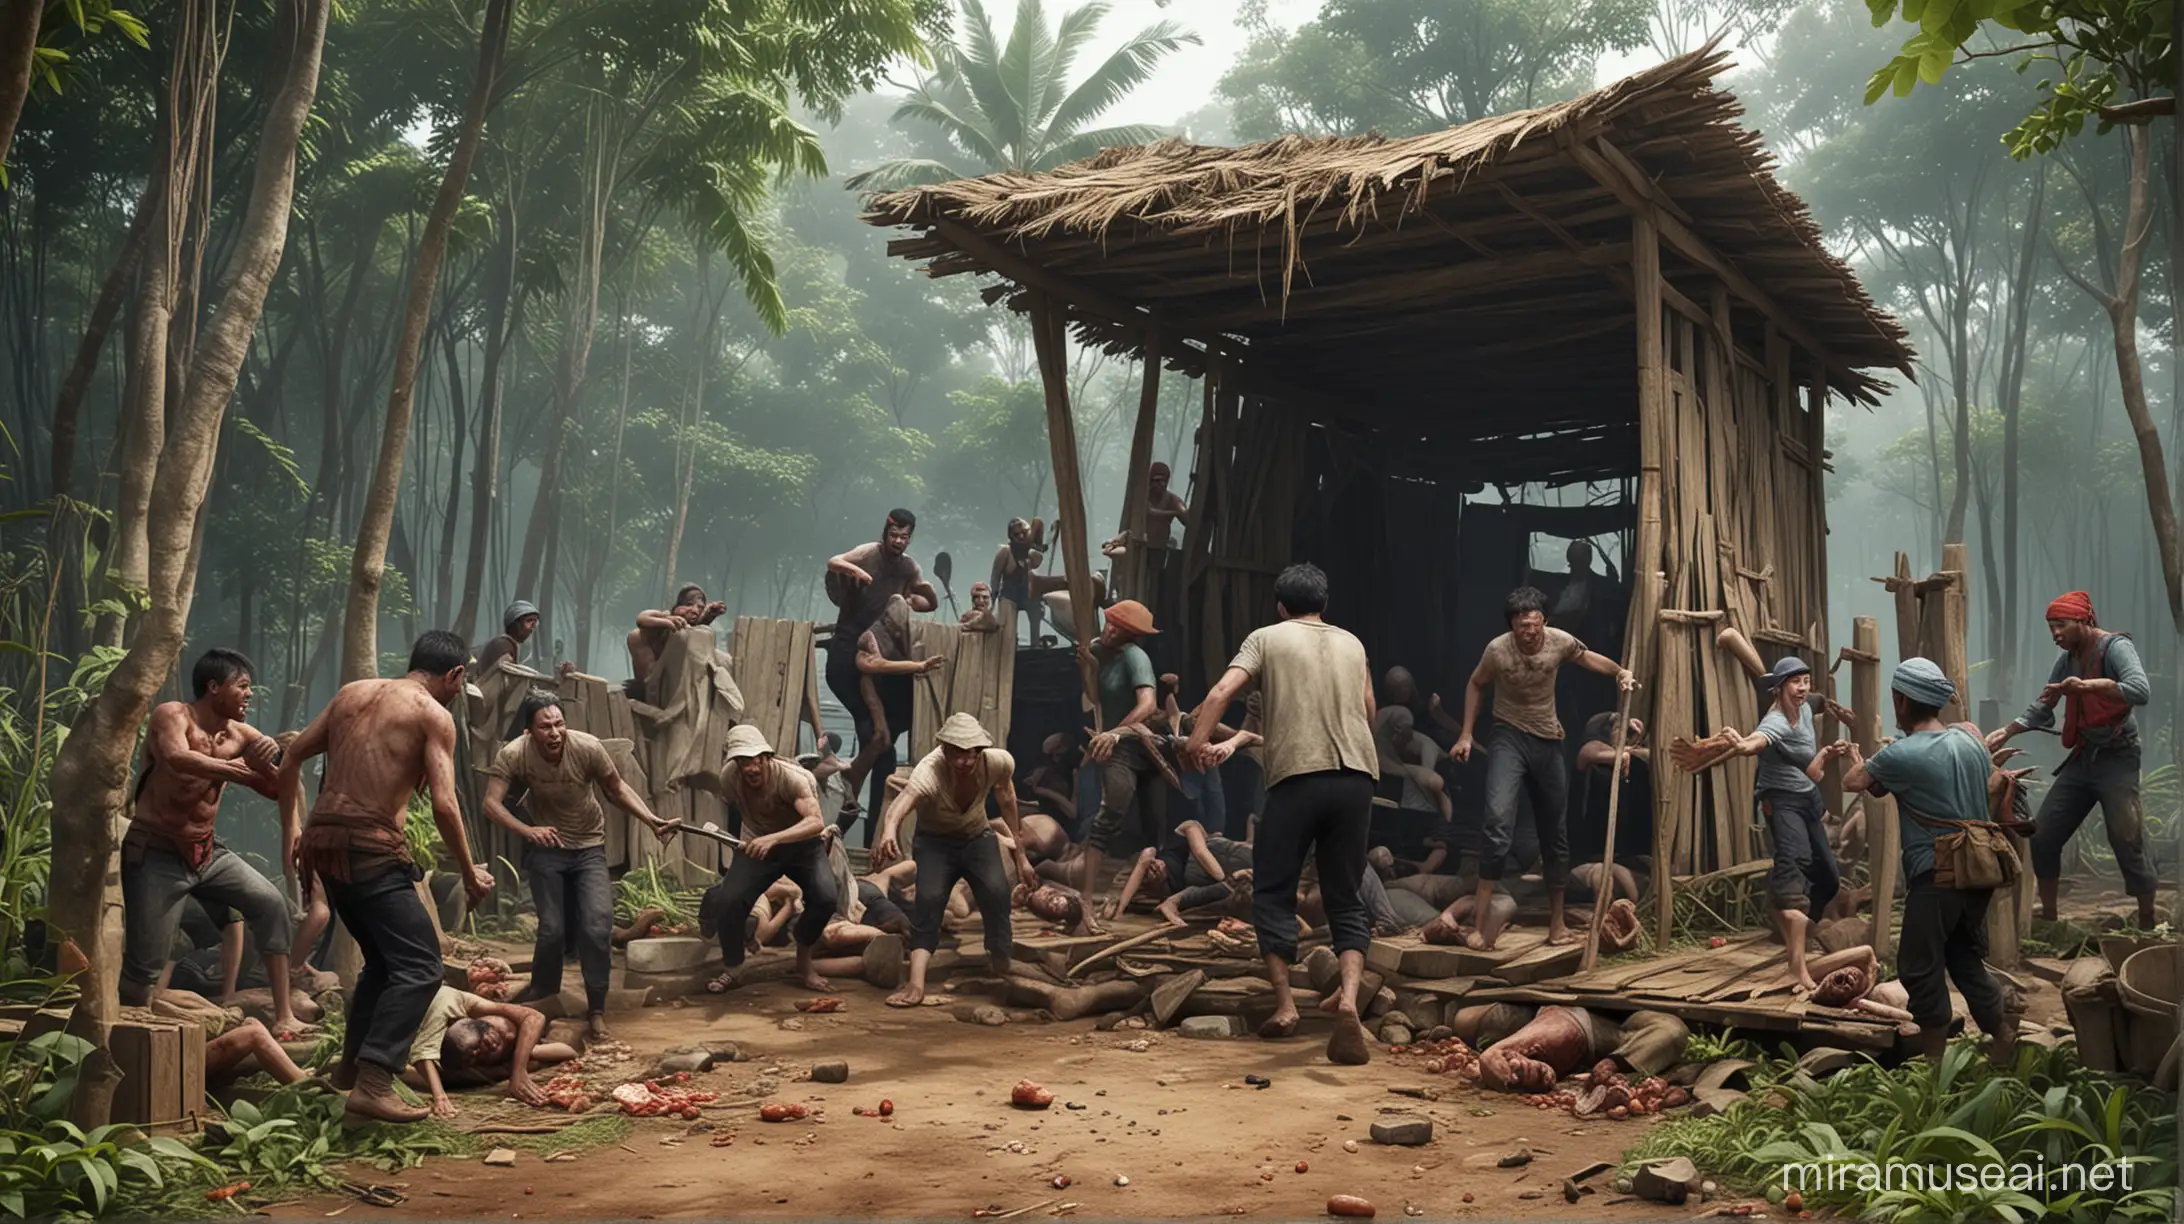 bulding shelter and fighting zombie around try to eating people in vietnamese